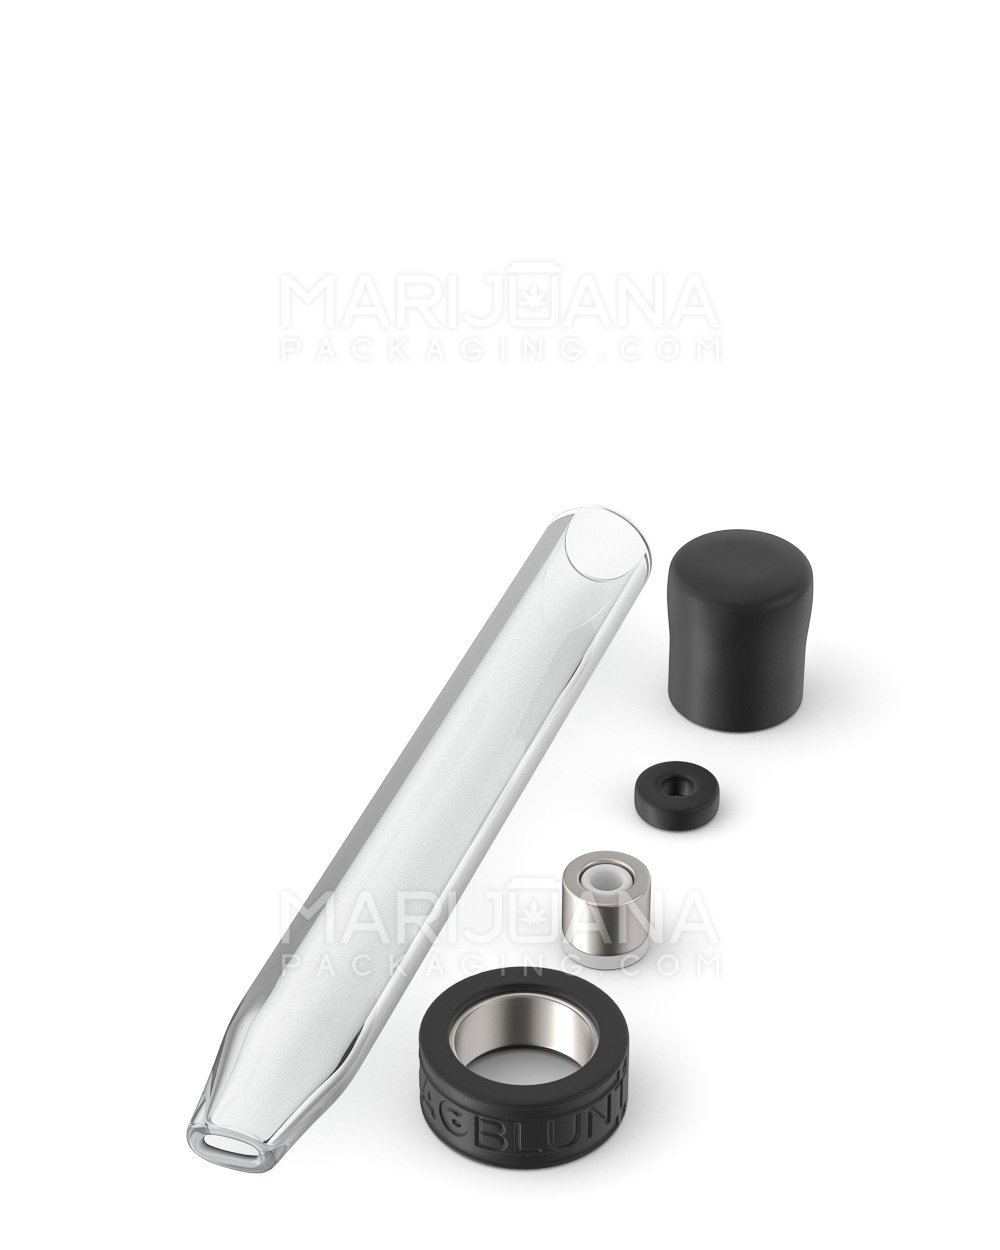 MAGBLUNT | Magnetic Asher Band Glass Blunt | 4in Long - Glass - Clear - 6